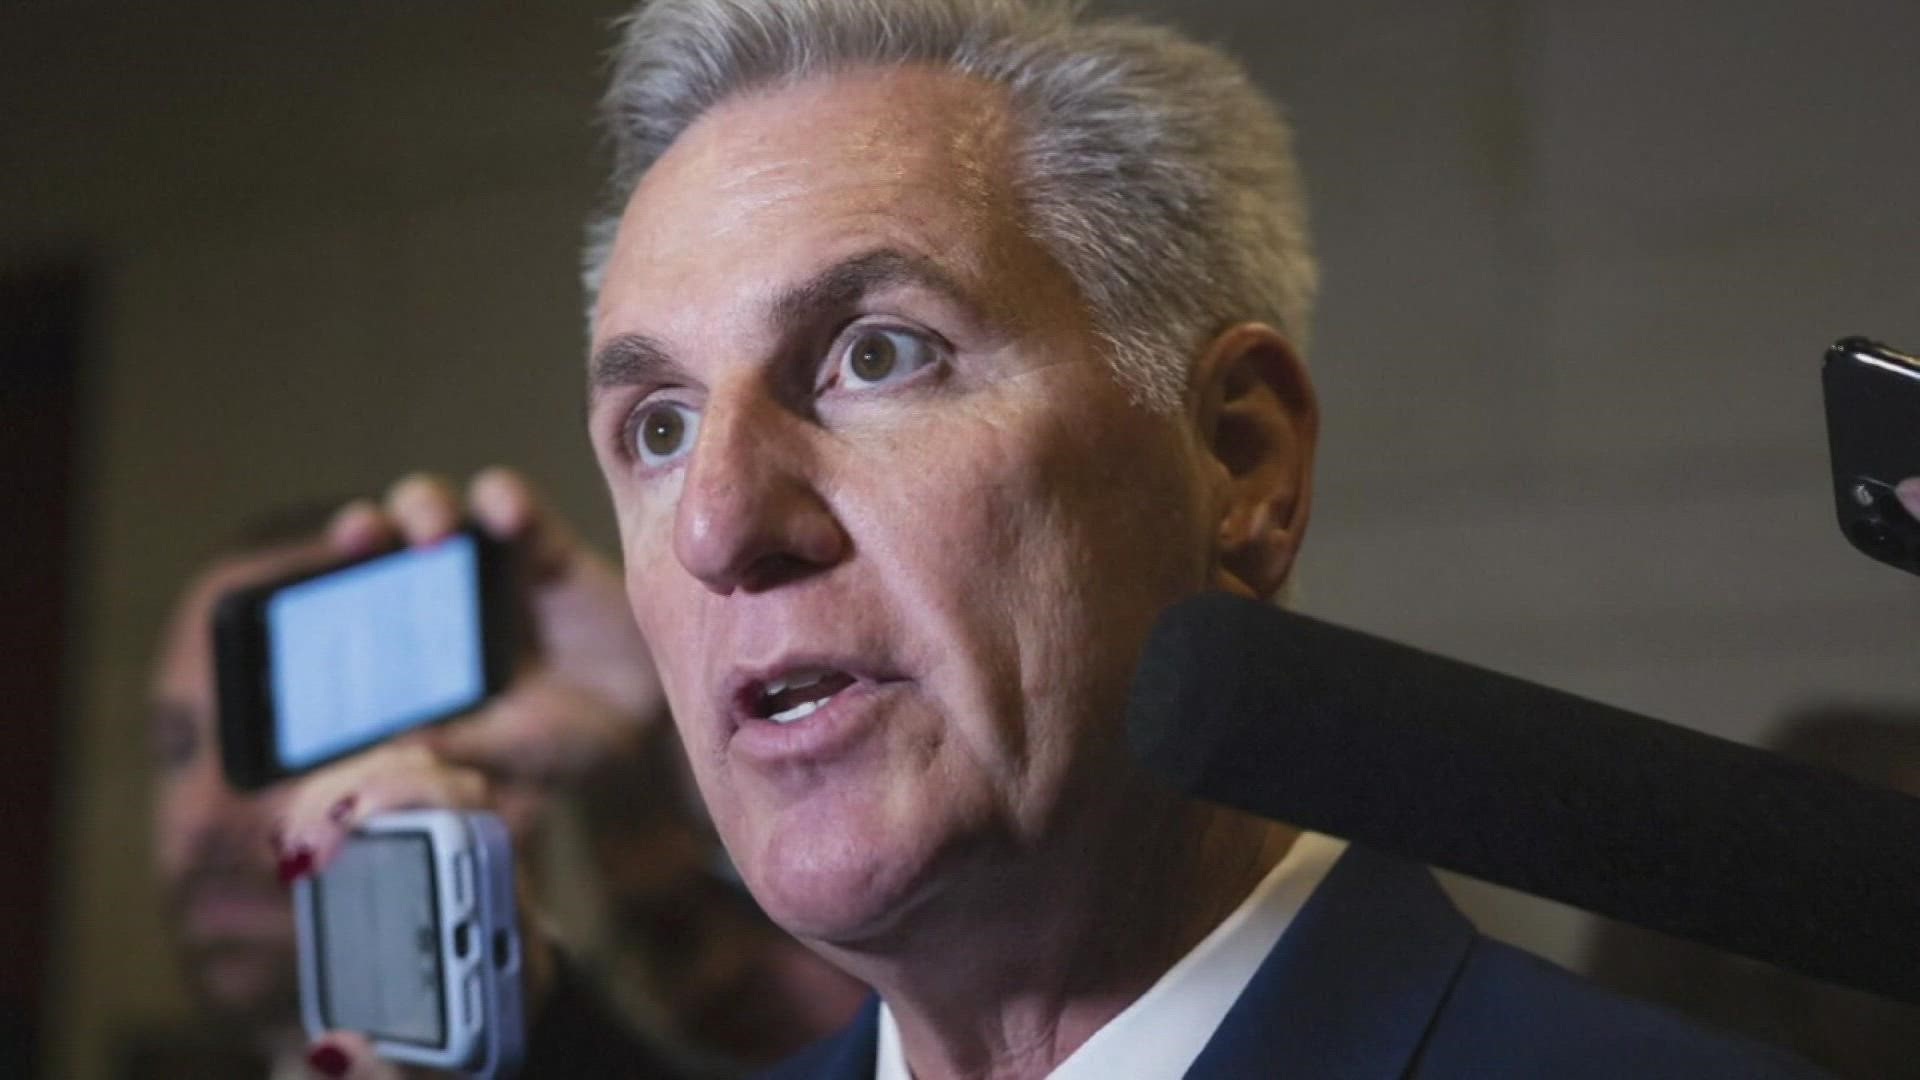 U.S. Rep. Kevin McCarthy still does not have the needed votes to win the Speaker role, but another round of votes is happening Wednesday.